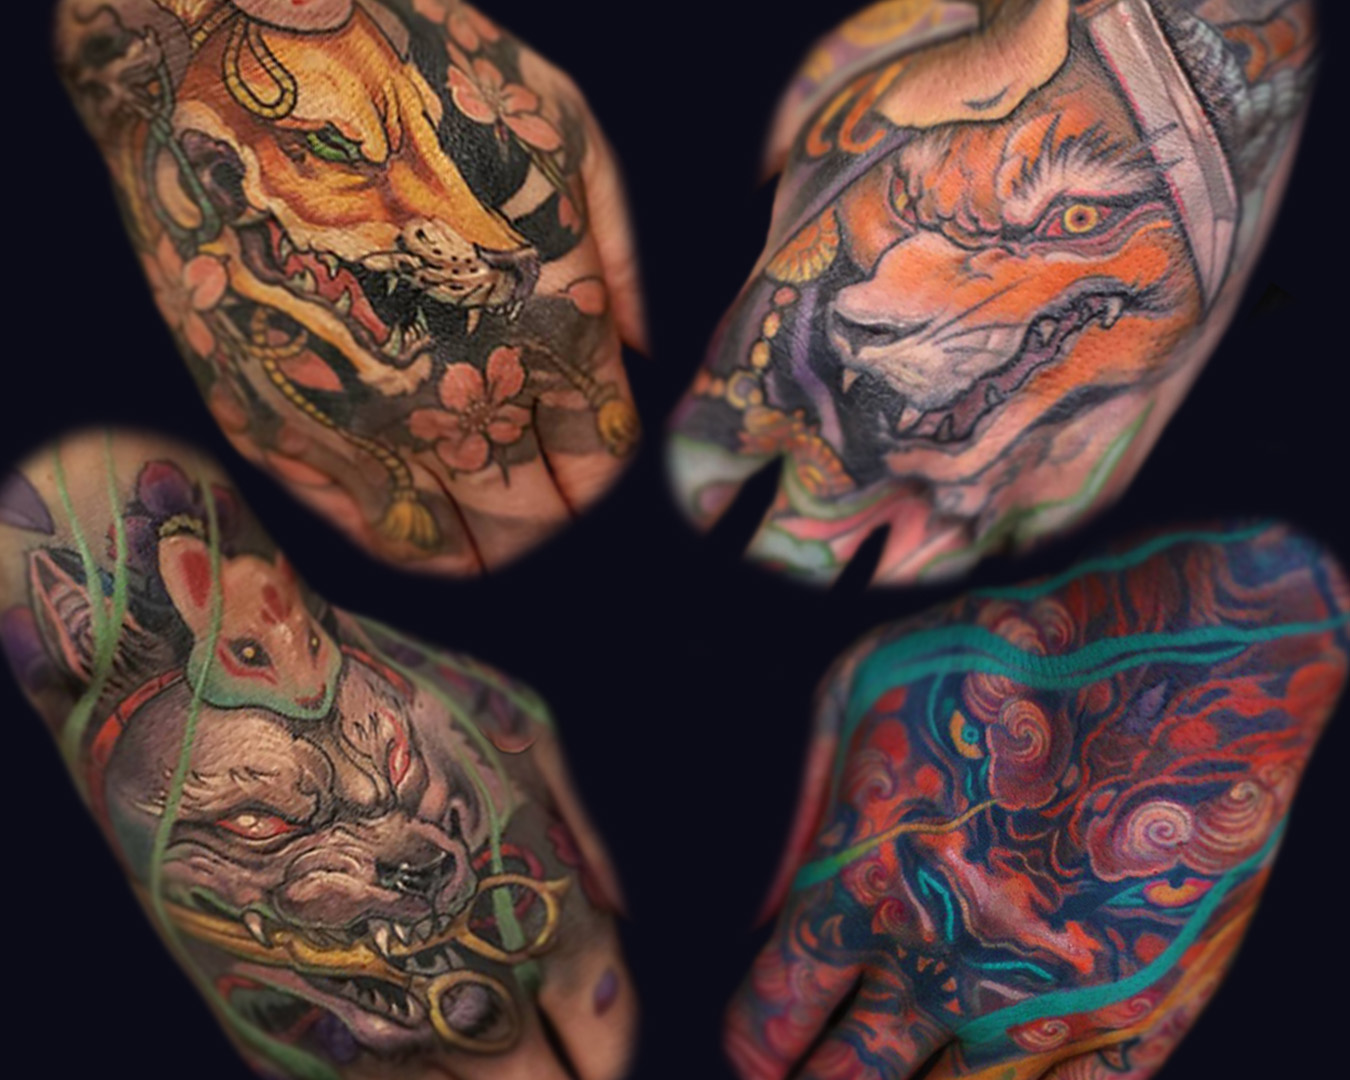 hand tattoos 2 foxes, a foo dog, and a cat with scissors by patrick paul o'niel